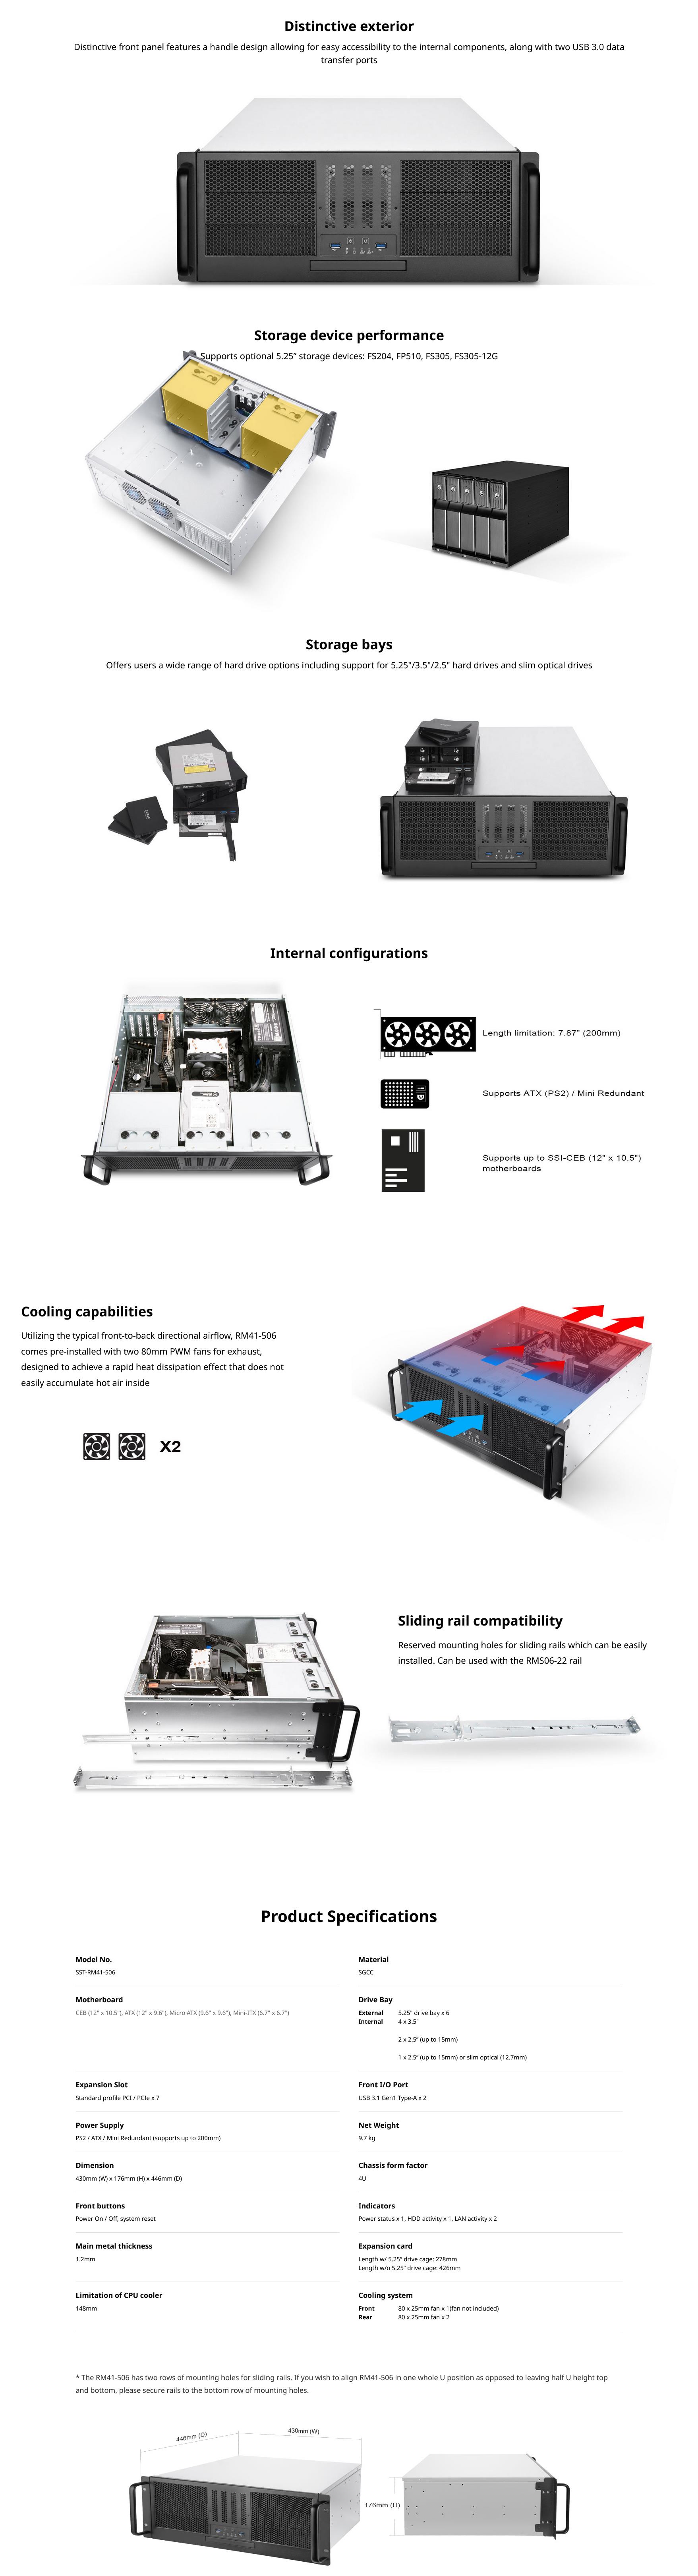 A large marketing image providing additional information about the product SilverStone RM41-506 4U Rackmount Case - Black - Additional alt info not provided